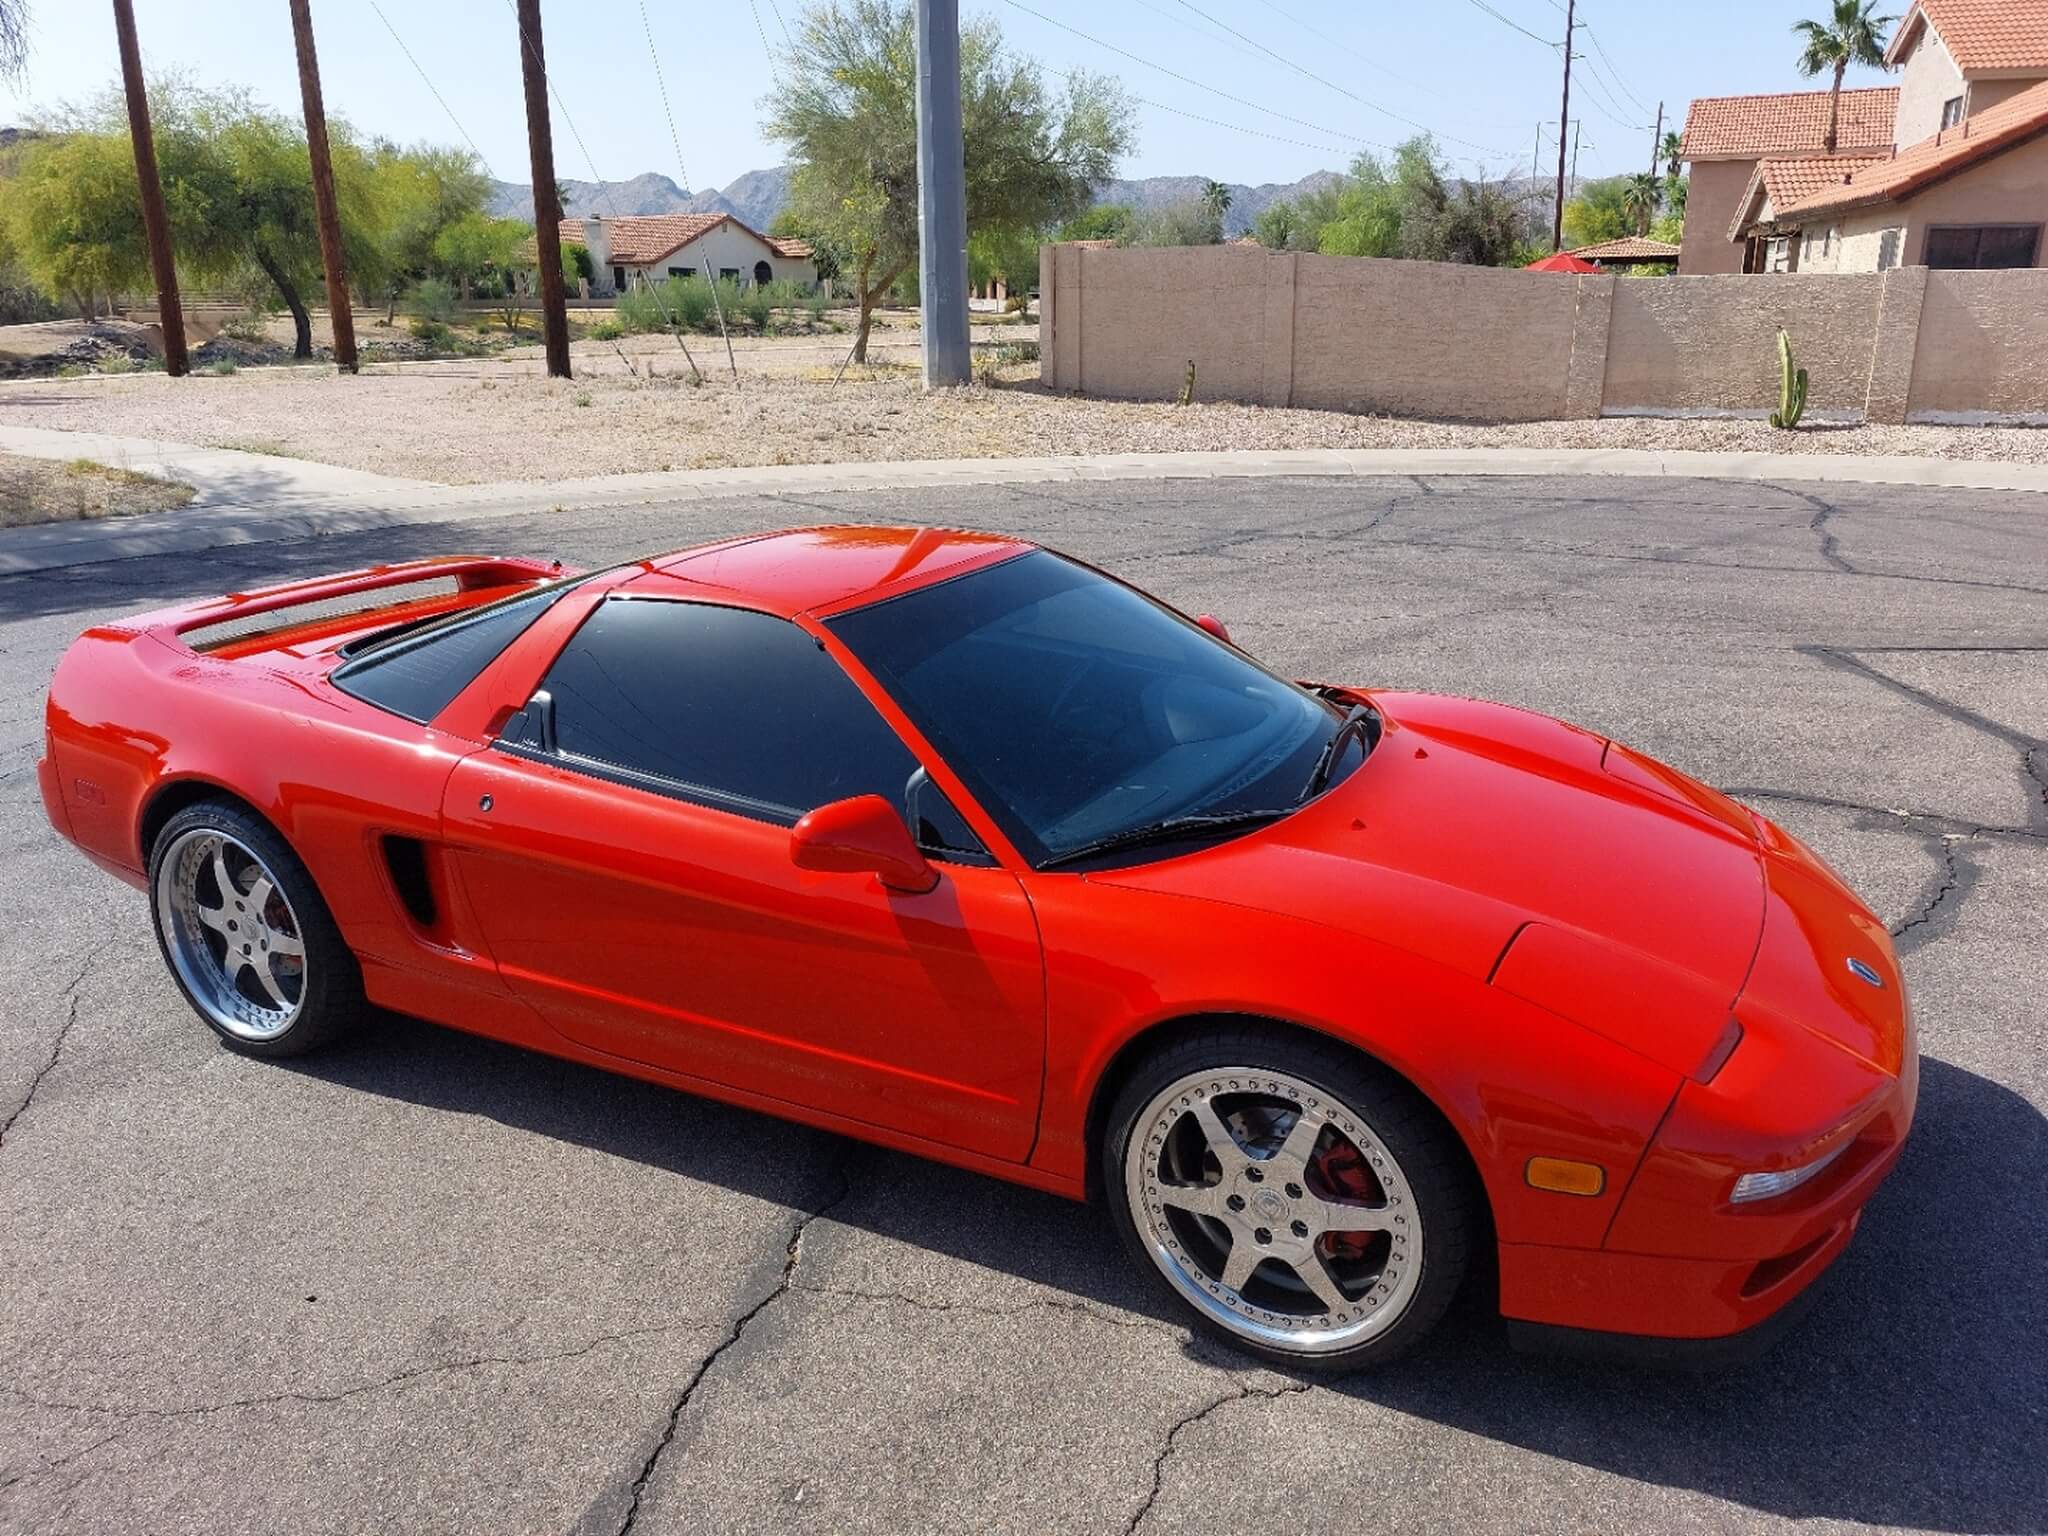 1995 Acura NSX-T Automatic